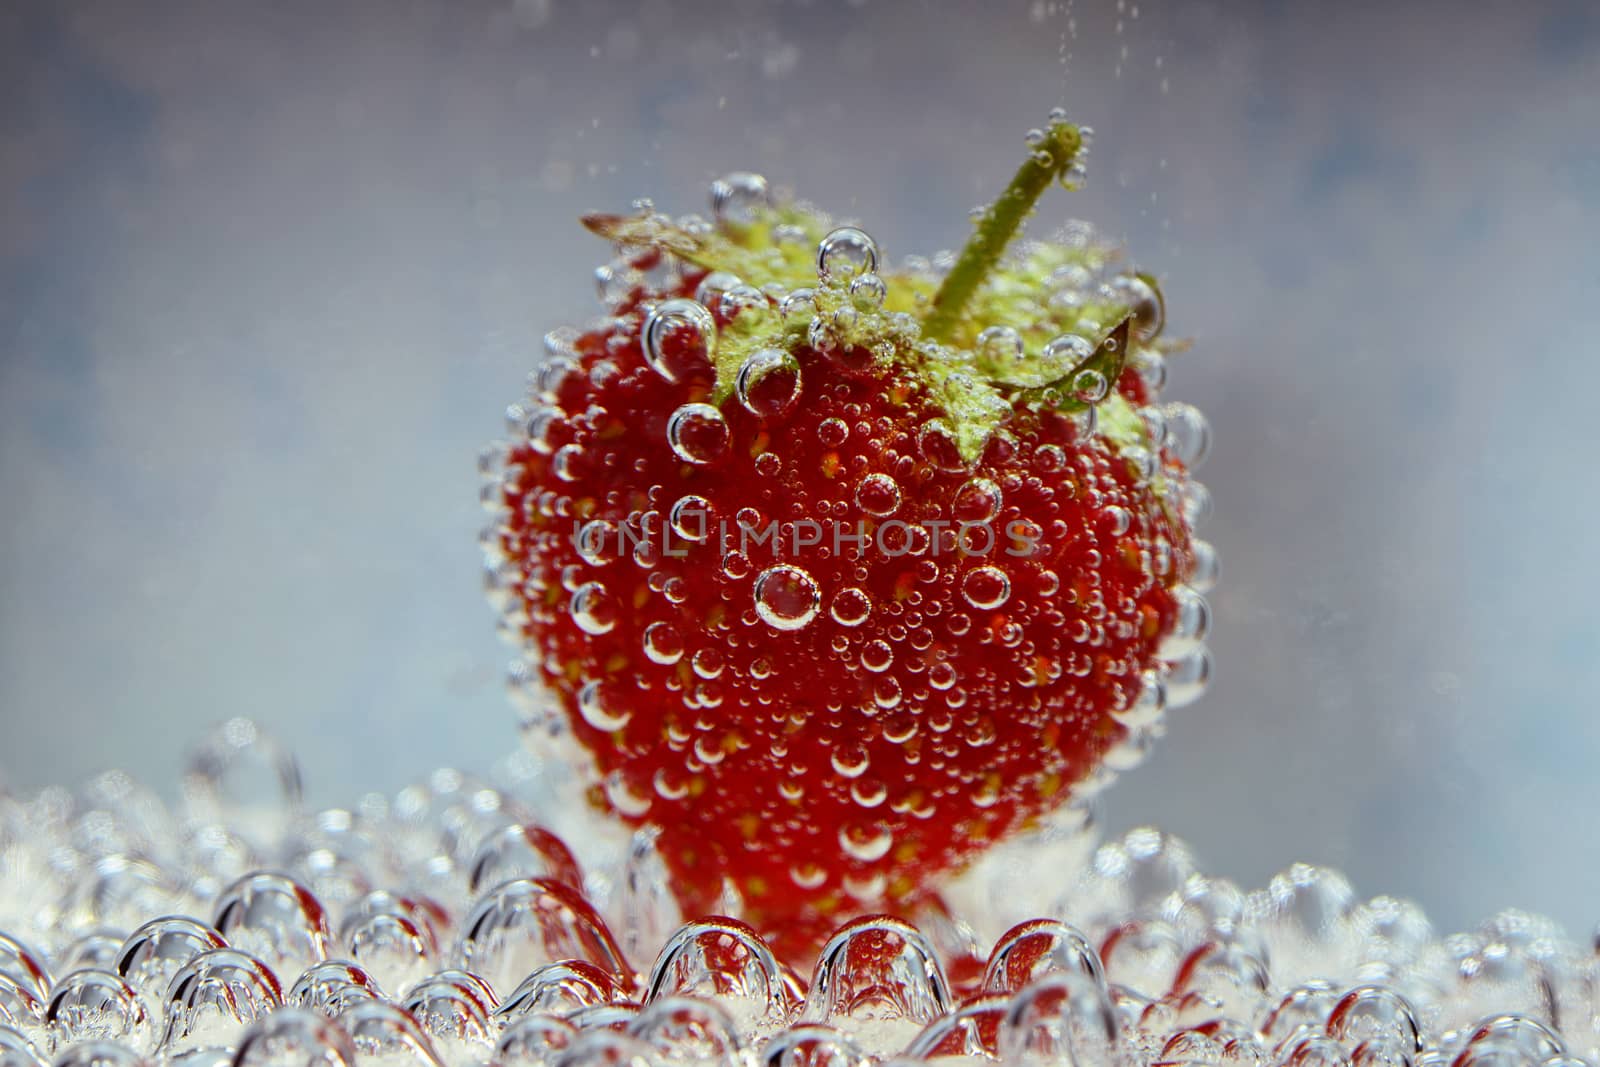 Photo of a strawberry with bubbles - underwater, on a blue background. Creative food photography.